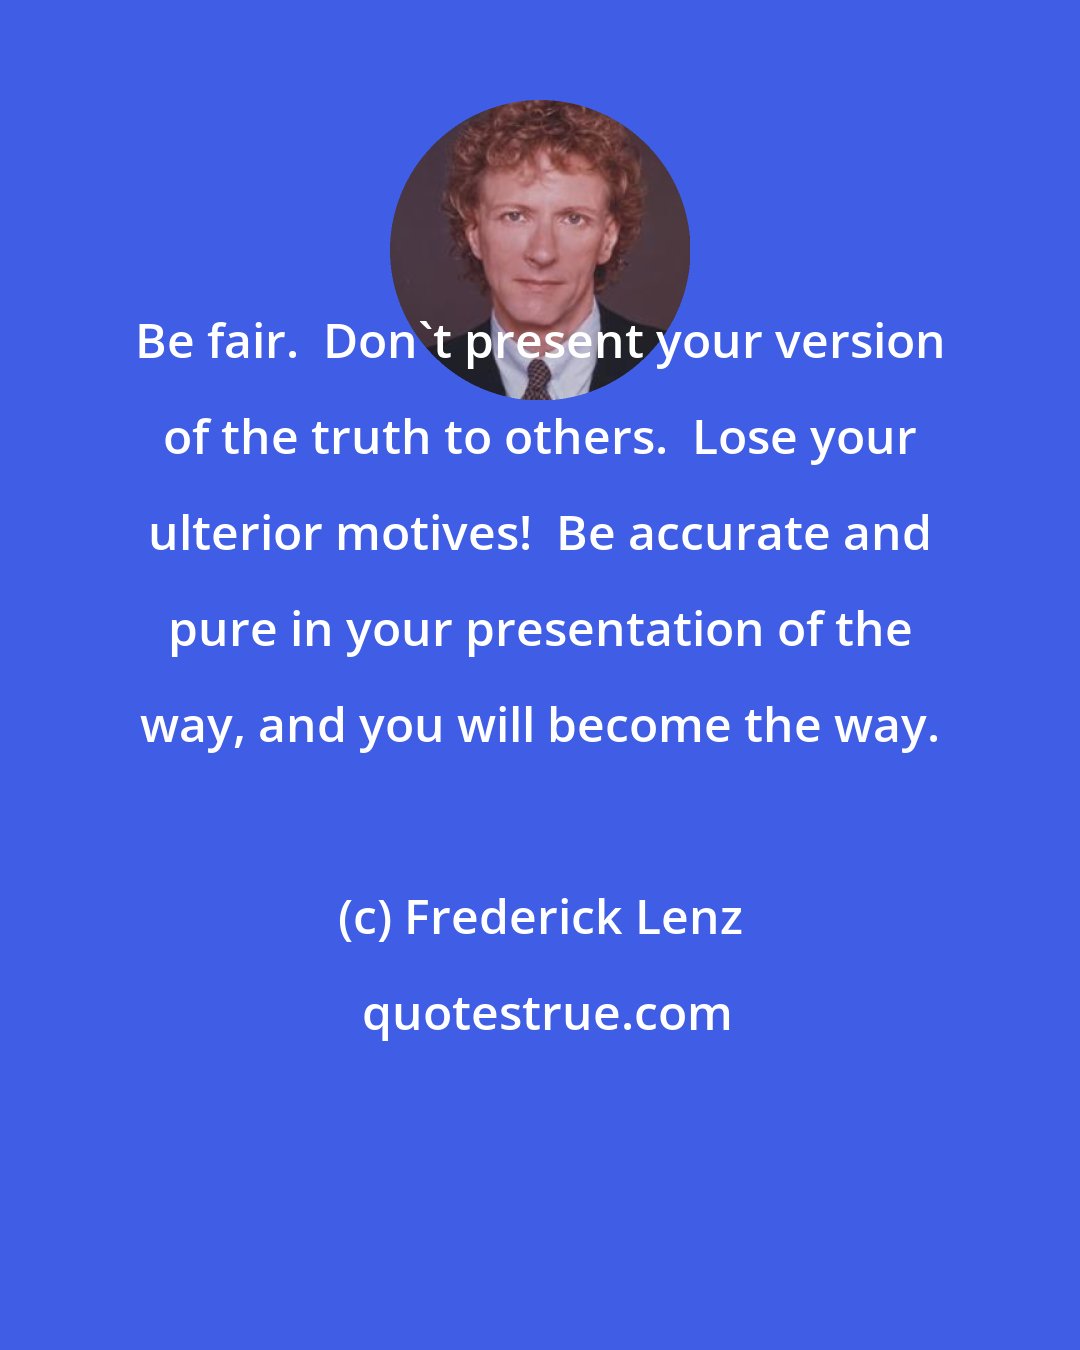 Frederick Lenz: Be fair.  Don't present your version of the truth to others.  Lose your ulterior motives!  Be accurate and pure in your presentation of the way, and you will become the way.